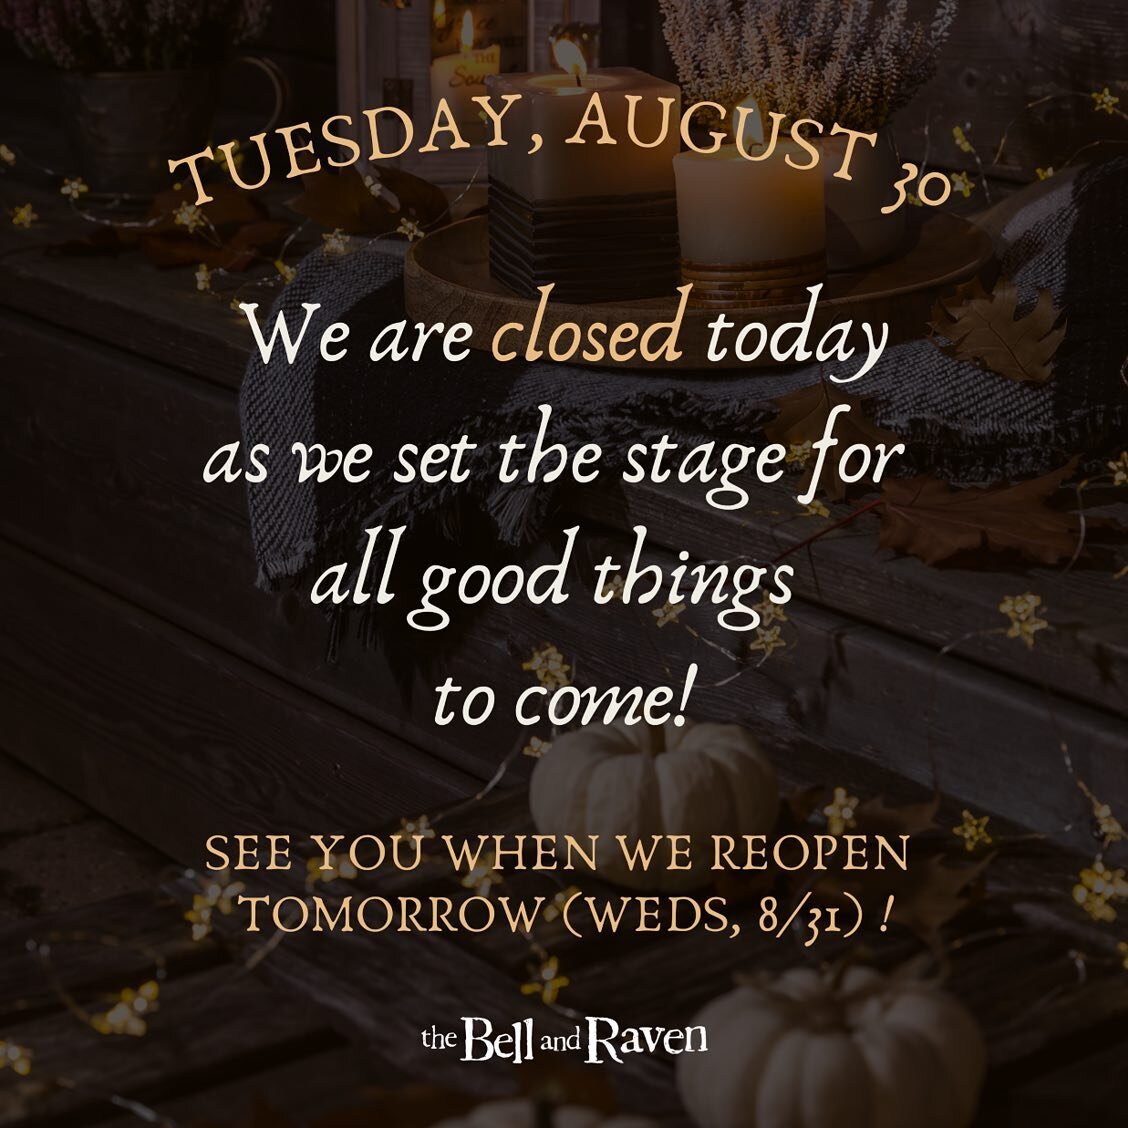 ::CLOSED TODAY:: (Tues 8/30) as the goblins have taken over the shop! See you when we reopen on Weds! 🧹